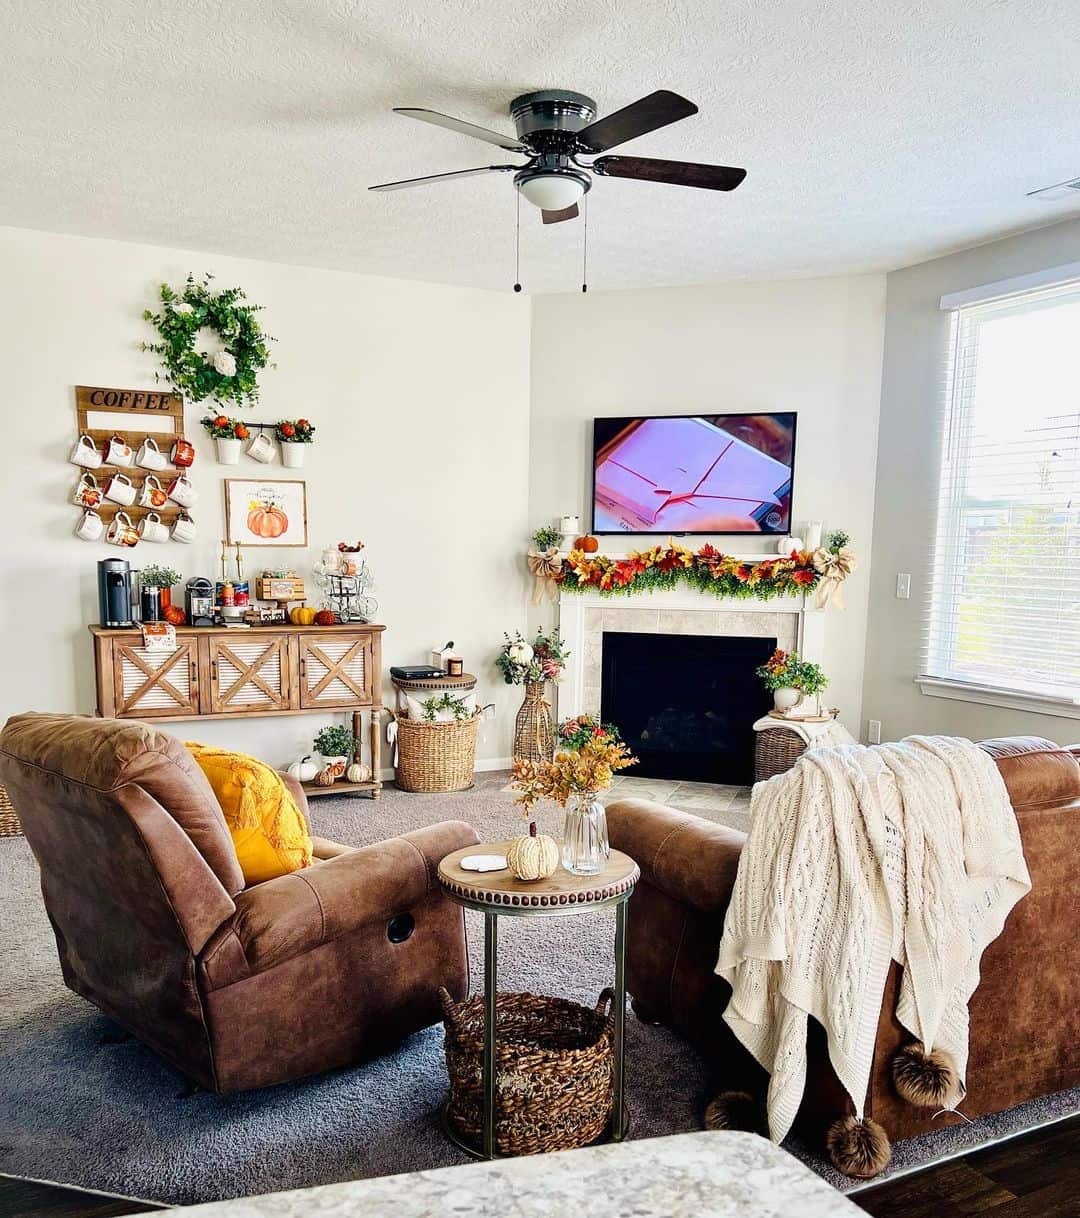 Creating an Autumn Farmhouse Aesthetic in Your Living Room